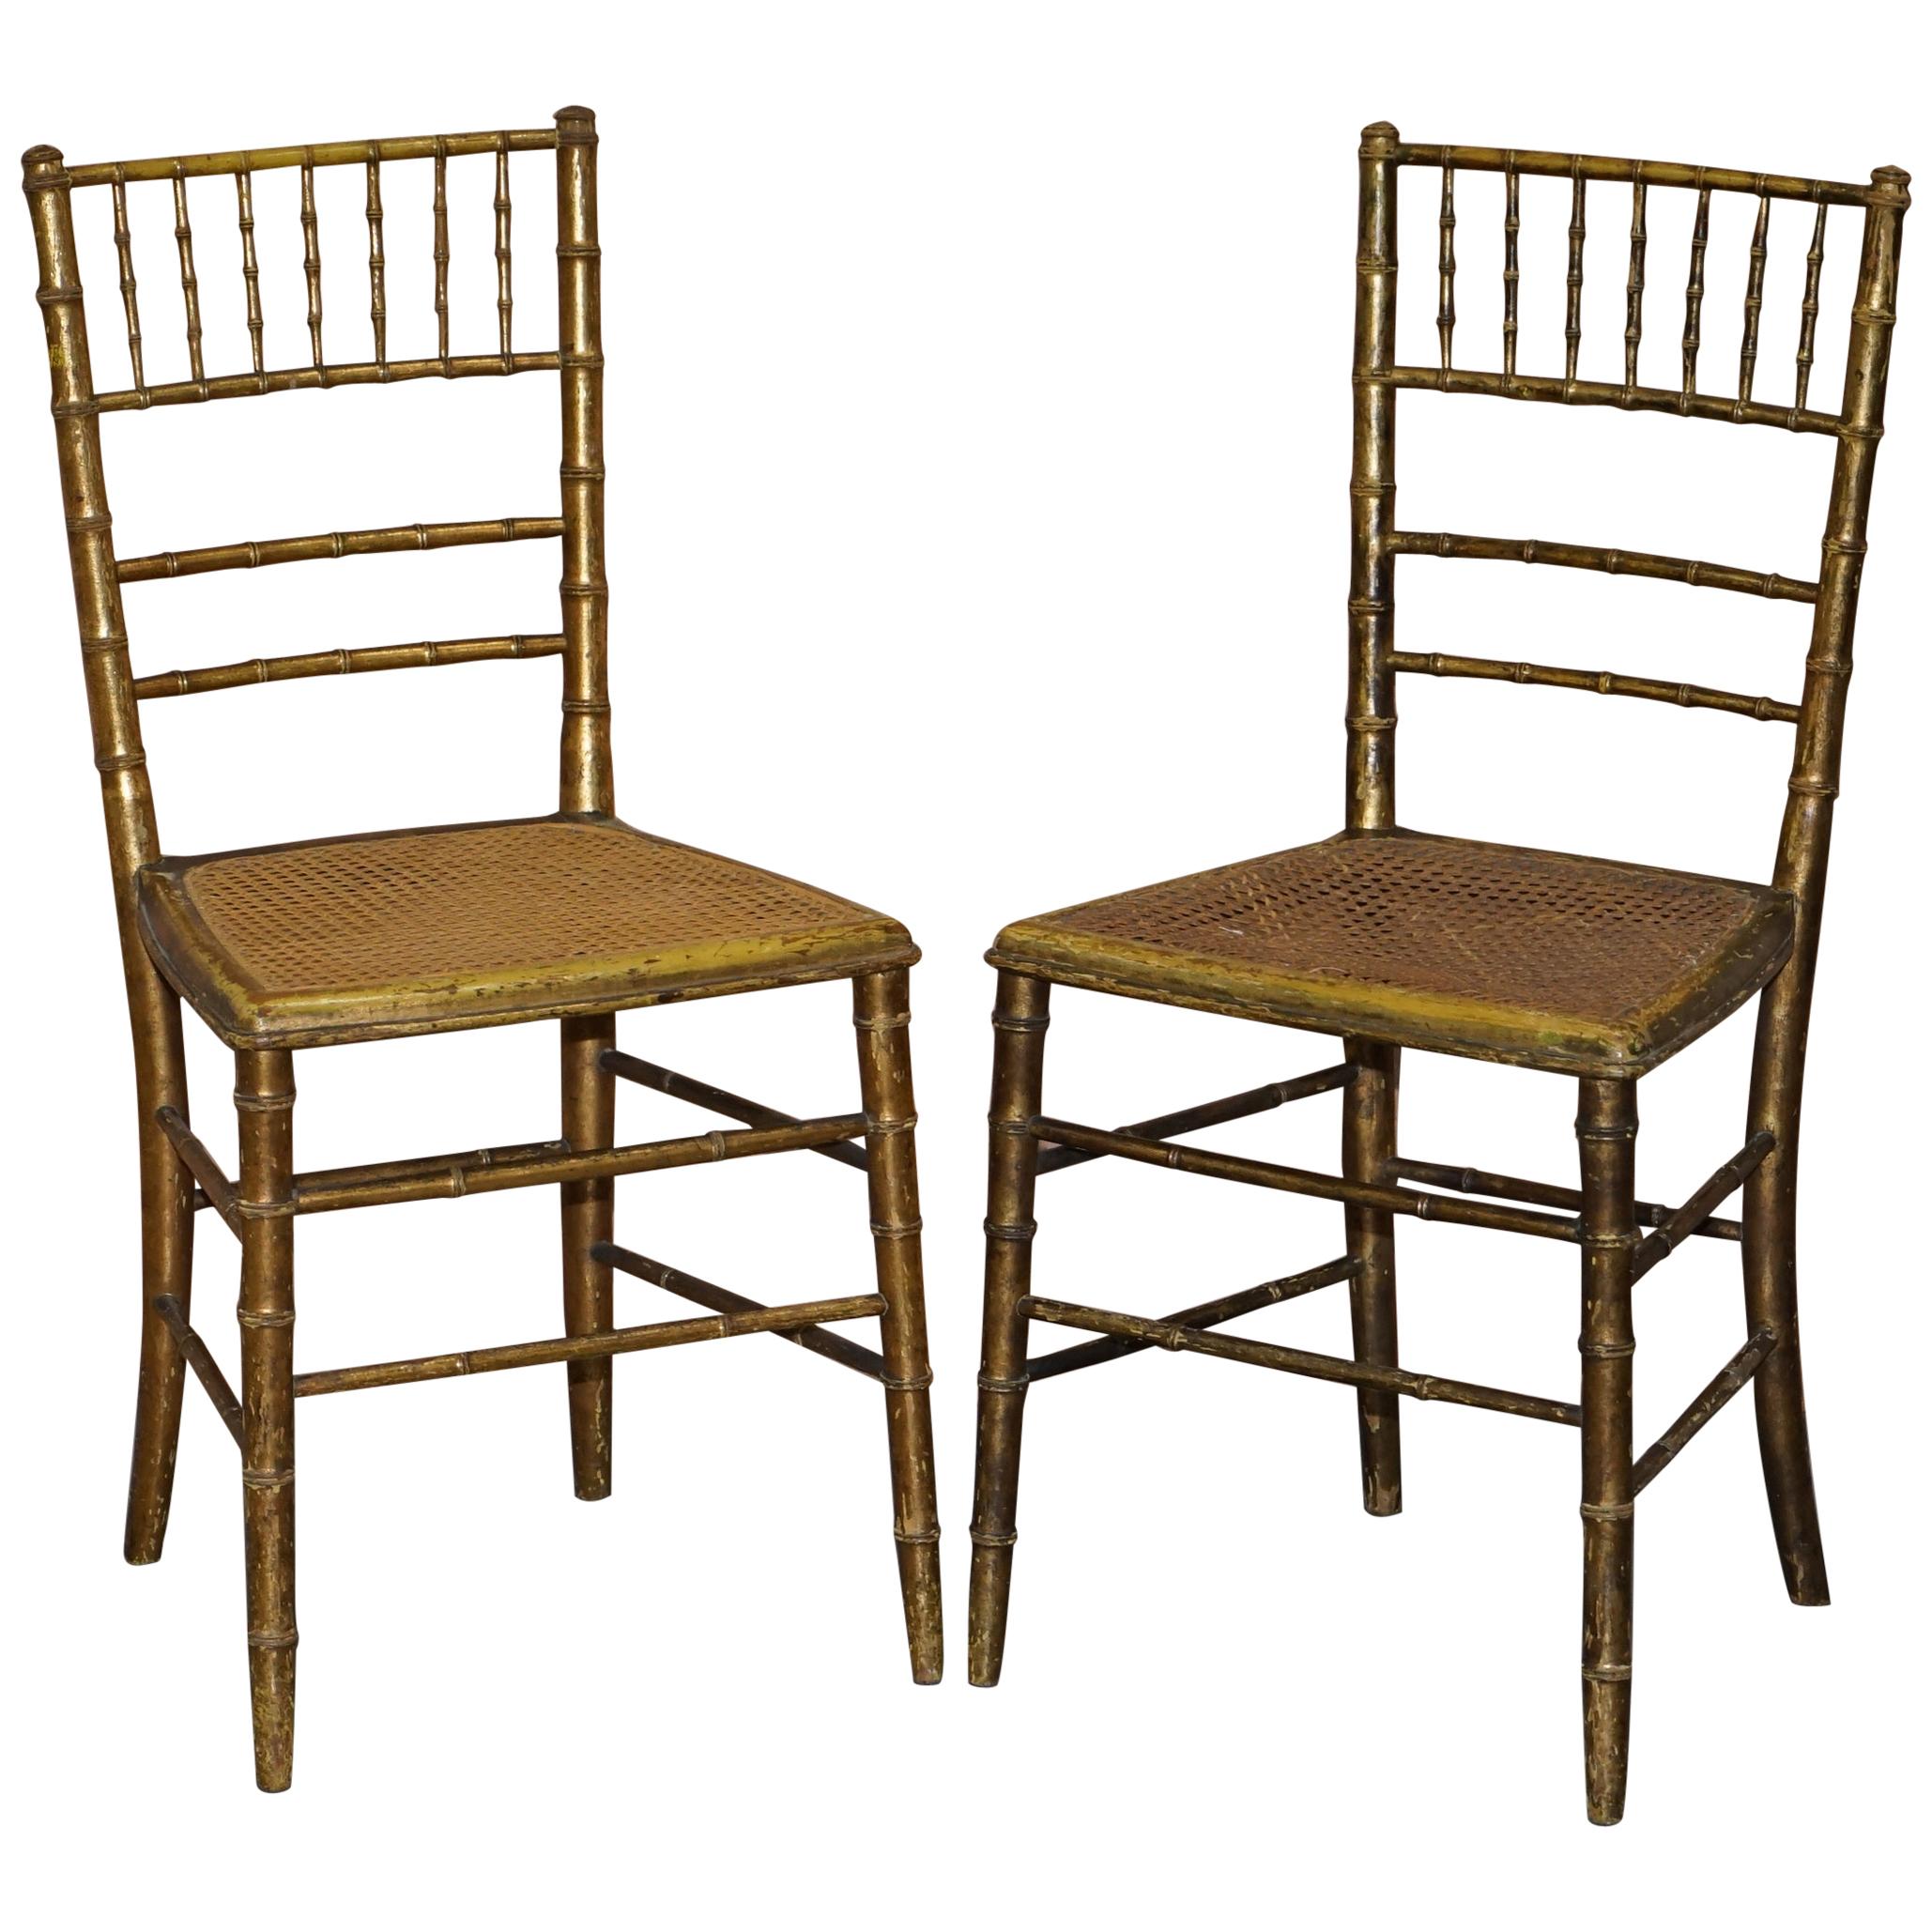 Pair of Original Giltwood Famboo Regency Bergere Chairs with Period Gold Gilding